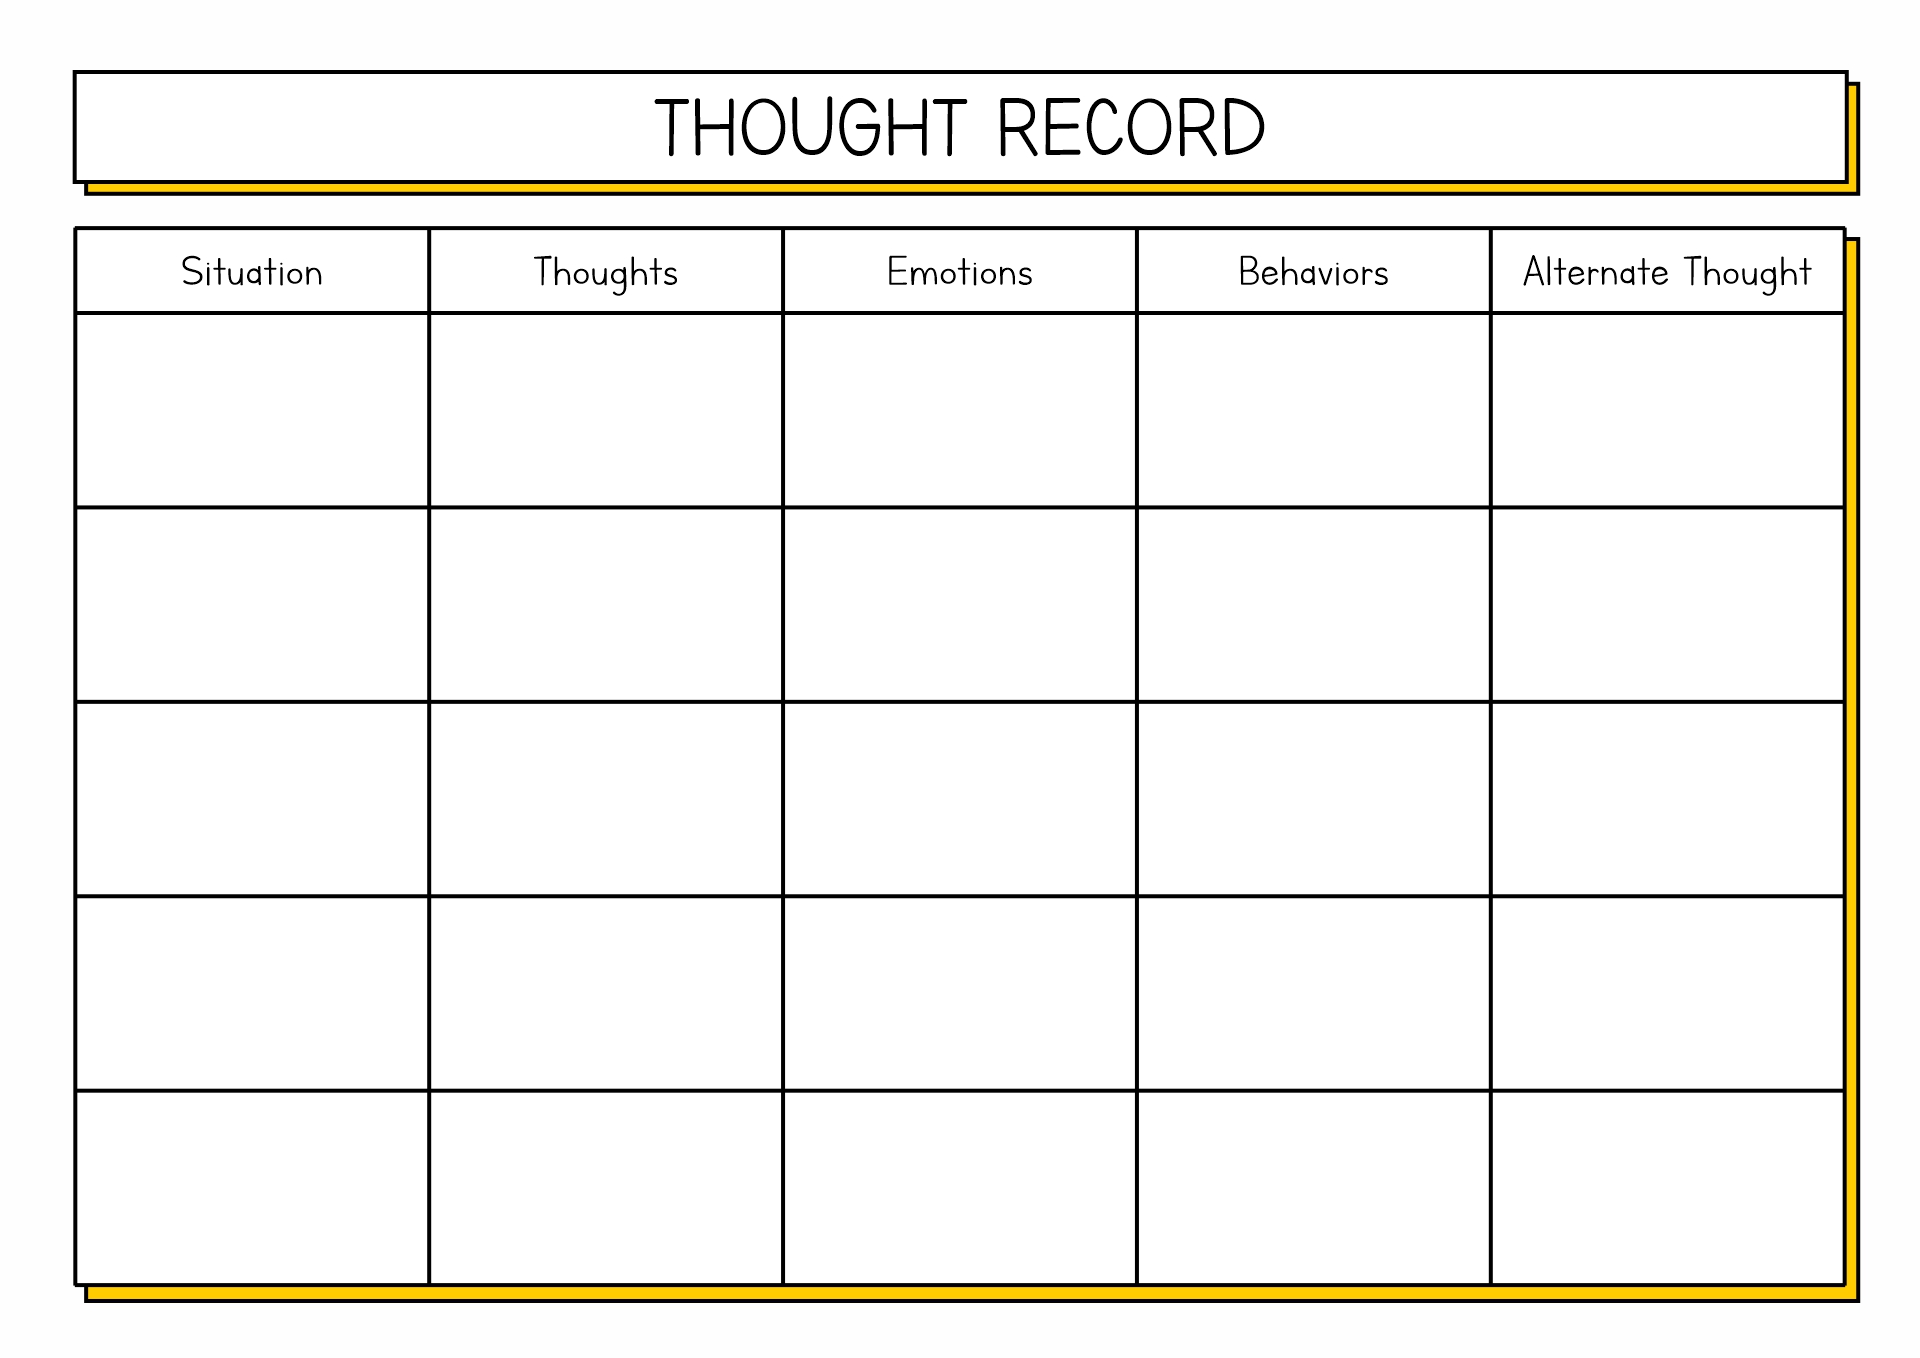 CBT Thought Record Worksheet